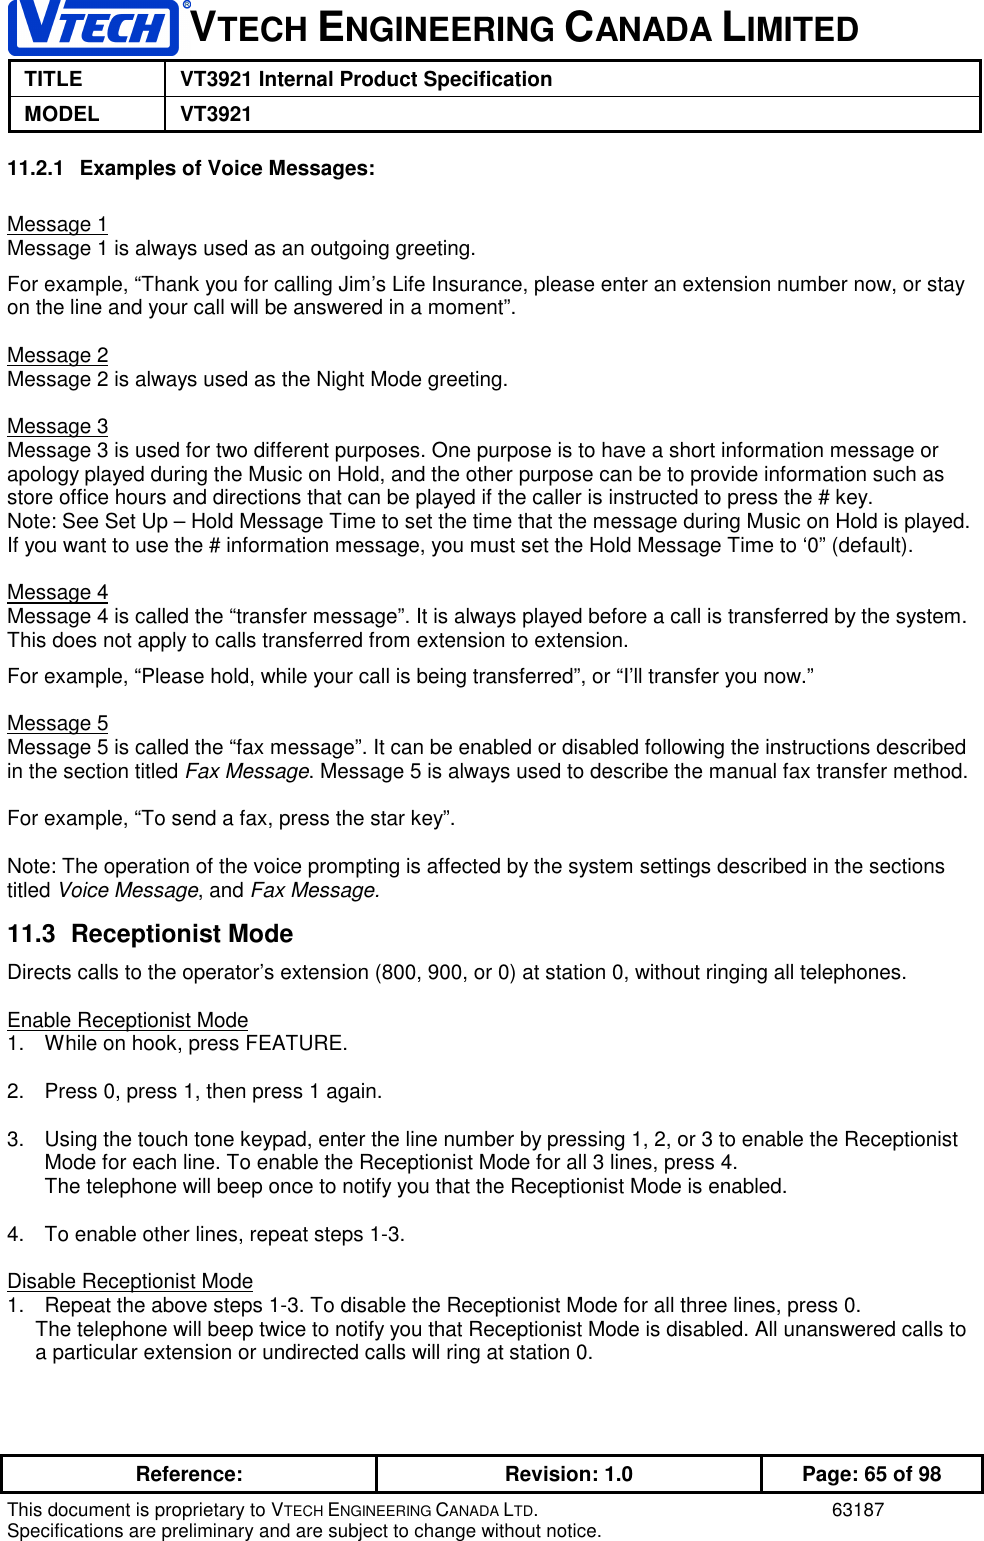 VTECH ENGINEERING CANADA LIMITEDTITLE VT3921 Internal Product SpecificationMODEL VT3921Reference: Revision: 1.0 Page: 65 of 98This document is proprietary to VTECH ENGINEERING CANADA LTD. 63187Specifications are preliminary and are subject to change without notice.11.2.1  Examples of Voice Messages:Message 1Message 1 is always used as an outgoing greeting.For example, “Thank you for calling Jim’s Life Insurance, please enter an extension number now, or stayon the line and your call will be answered in a moment”.Message 2Message 2 is always used as the Night Mode greeting.Message 3Message 3 is used for two different purposes. One purpose is to have a short information message orapology played during the Music on Hold, and the other purpose can be to provide information such asstore office hours and directions that can be played if the caller is instructed to press the # key.Note: See Set Up – Hold Message Time to set the time that the message during Music on Hold is played.If you want to use the # information message, you must set the Hold Message Time to ‘0” (default).Message 4Message 4 is called the “transfer message”. It is always played before a call is transferred by the system.This does not apply to calls transferred from extension to extension.For example, “Please hold, while your call is being transferred”, or “I’ll transfer you now.”Message 5Message 5 is called the “fax message”. It can be enabled or disabled following the instructions describedin the section titled Fax Message. Message 5 is always used to describe the manual fax transfer method.For example, “To send a fax, press the star key”.Note: The operation of the voice prompting is affected by the system settings described in the sectionstitled Voice Message, and Fax Message.11.3 Receptionist ModeDirects calls to the operator’s extension (800, 900, or 0) at station 0, without ringing all telephones.Enable Receptionist Mode1.  While on hook, press FEATURE.2.  Press 0, press 1, then press 1 again.3.  Using the touch tone keypad, enter the line number by pressing 1, 2, or 3 to enable the ReceptionistMode for each line. To enable the Receptionist Mode for all 3 lines, press 4.The telephone will beep once to notify you that the Receptionist Mode is enabled.4.  To enable other lines, repeat steps 1-3.Disable Receptionist Mode1.  Repeat the above steps 1-3. To disable the Receptionist Mode for all three lines, press 0.The telephone will beep twice to notify you that Receptionist Mode is disabled. All unanswered calls toa particular extension or undirected calls will ring at station 0.